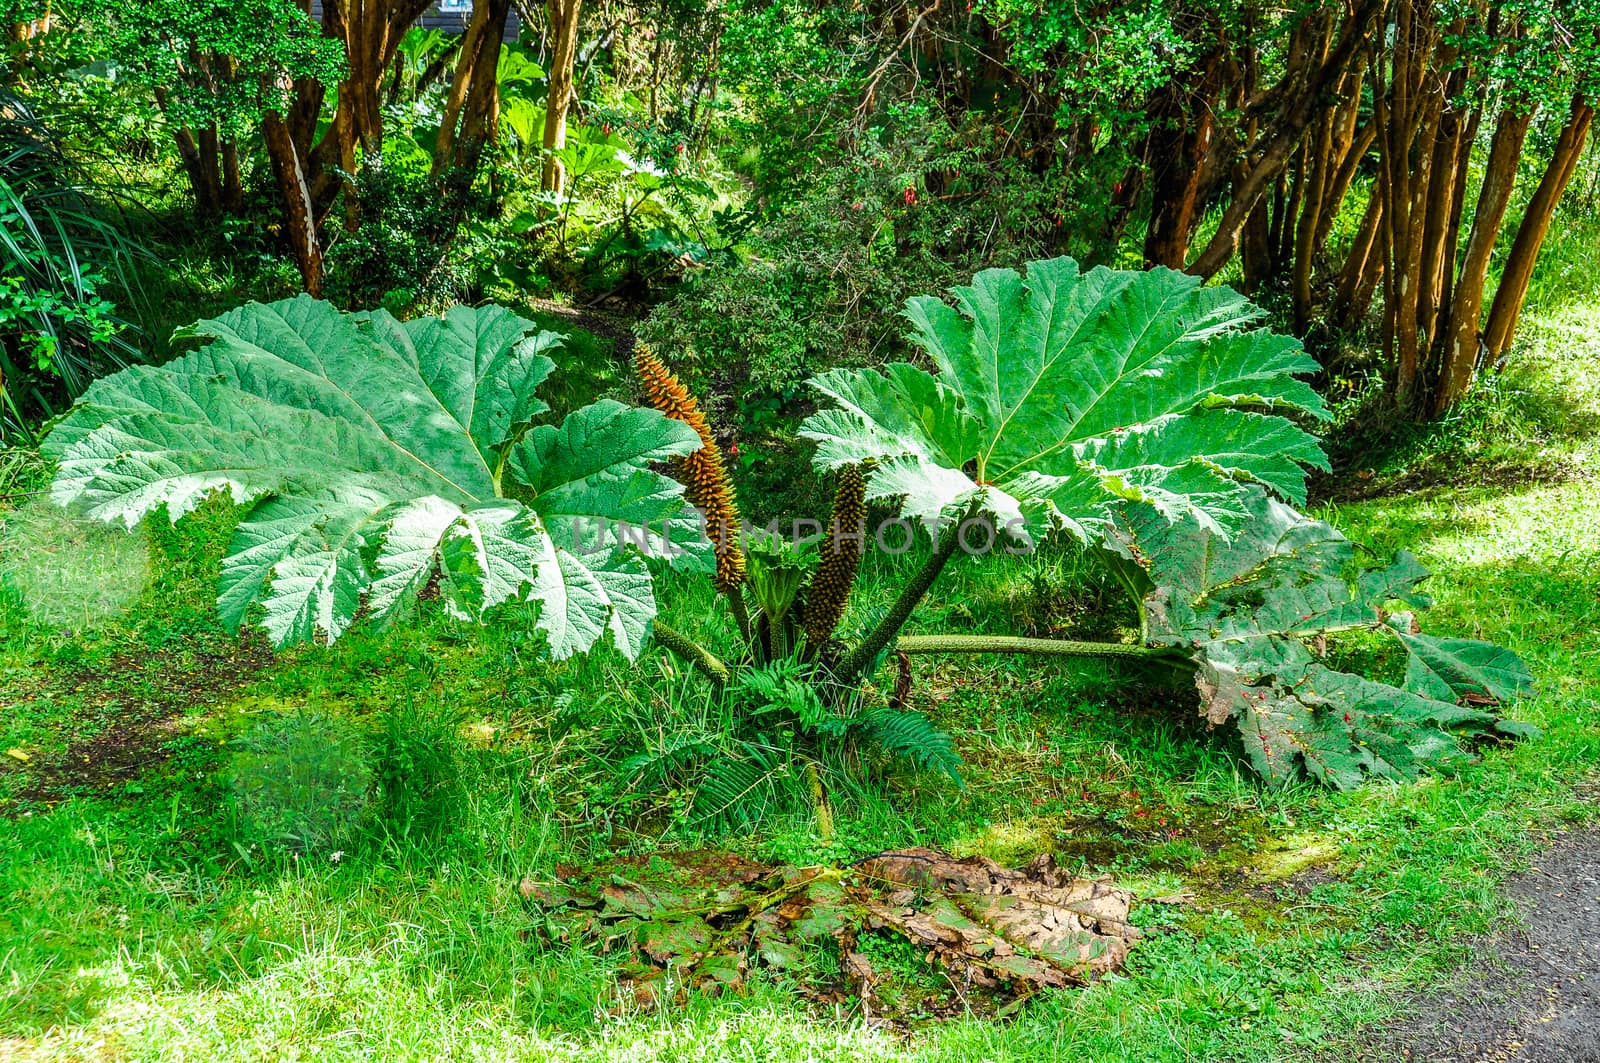 Giant leaves in the national park of Chiloe Island, Patagonia, Chile